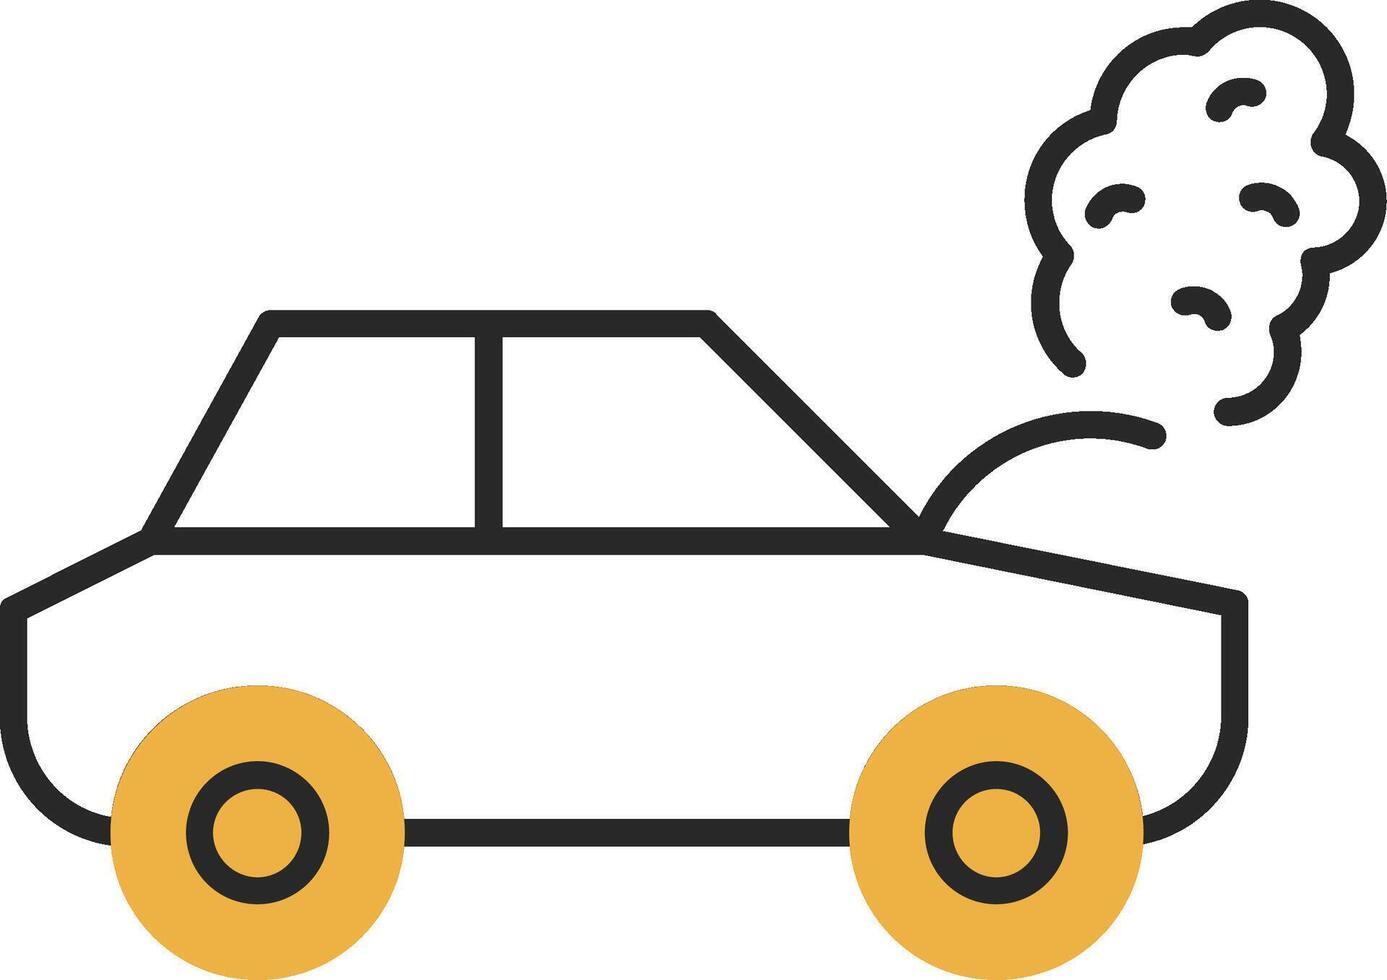 Broken Car Skined Filled Icon vector